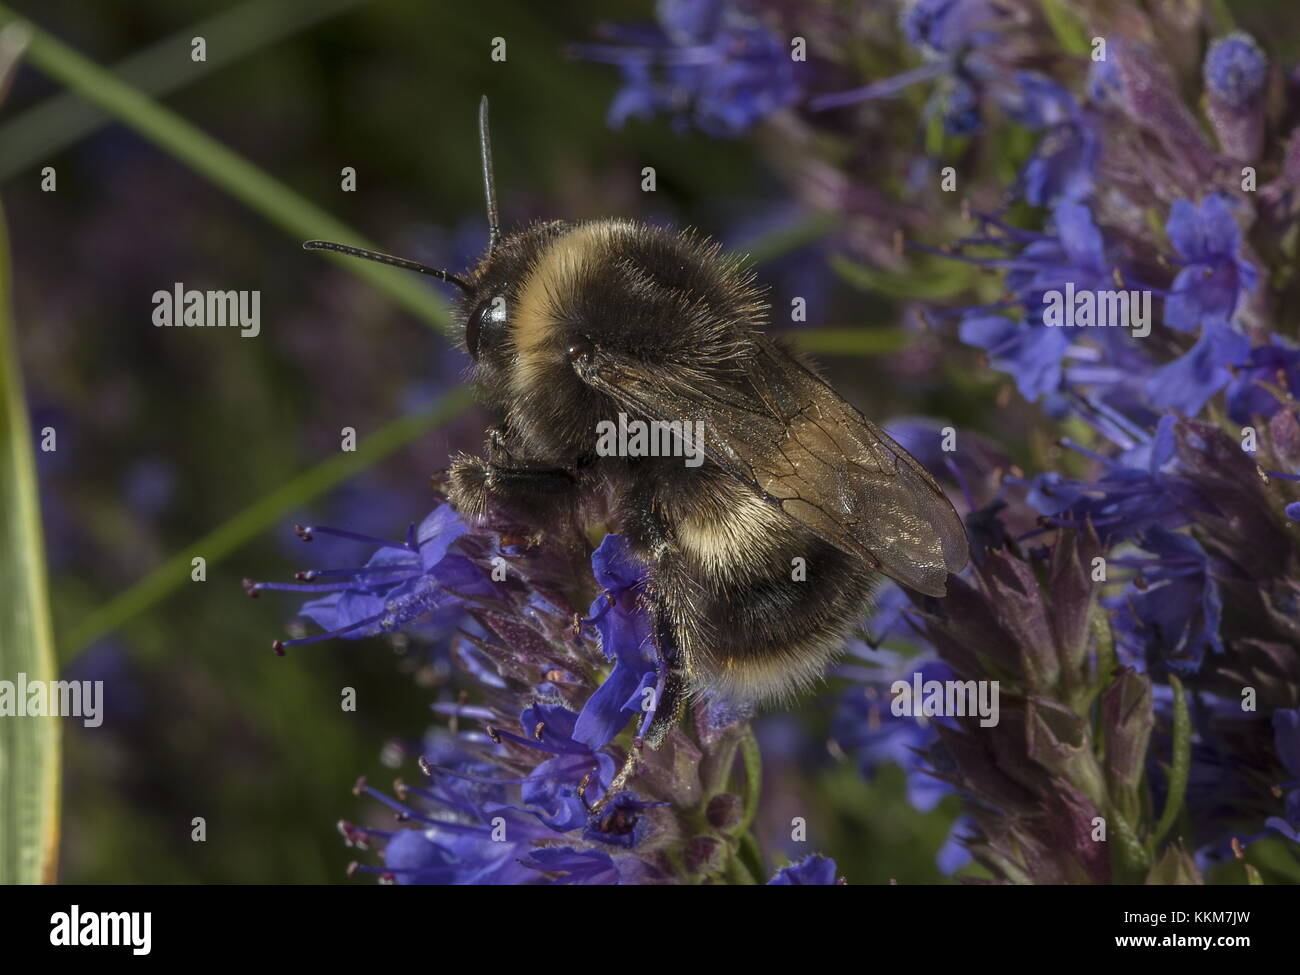 Worker Buff-tailed bumble-bee, Bombus terrestris,  on Hyssop flowers in herb garden. Stock Photo